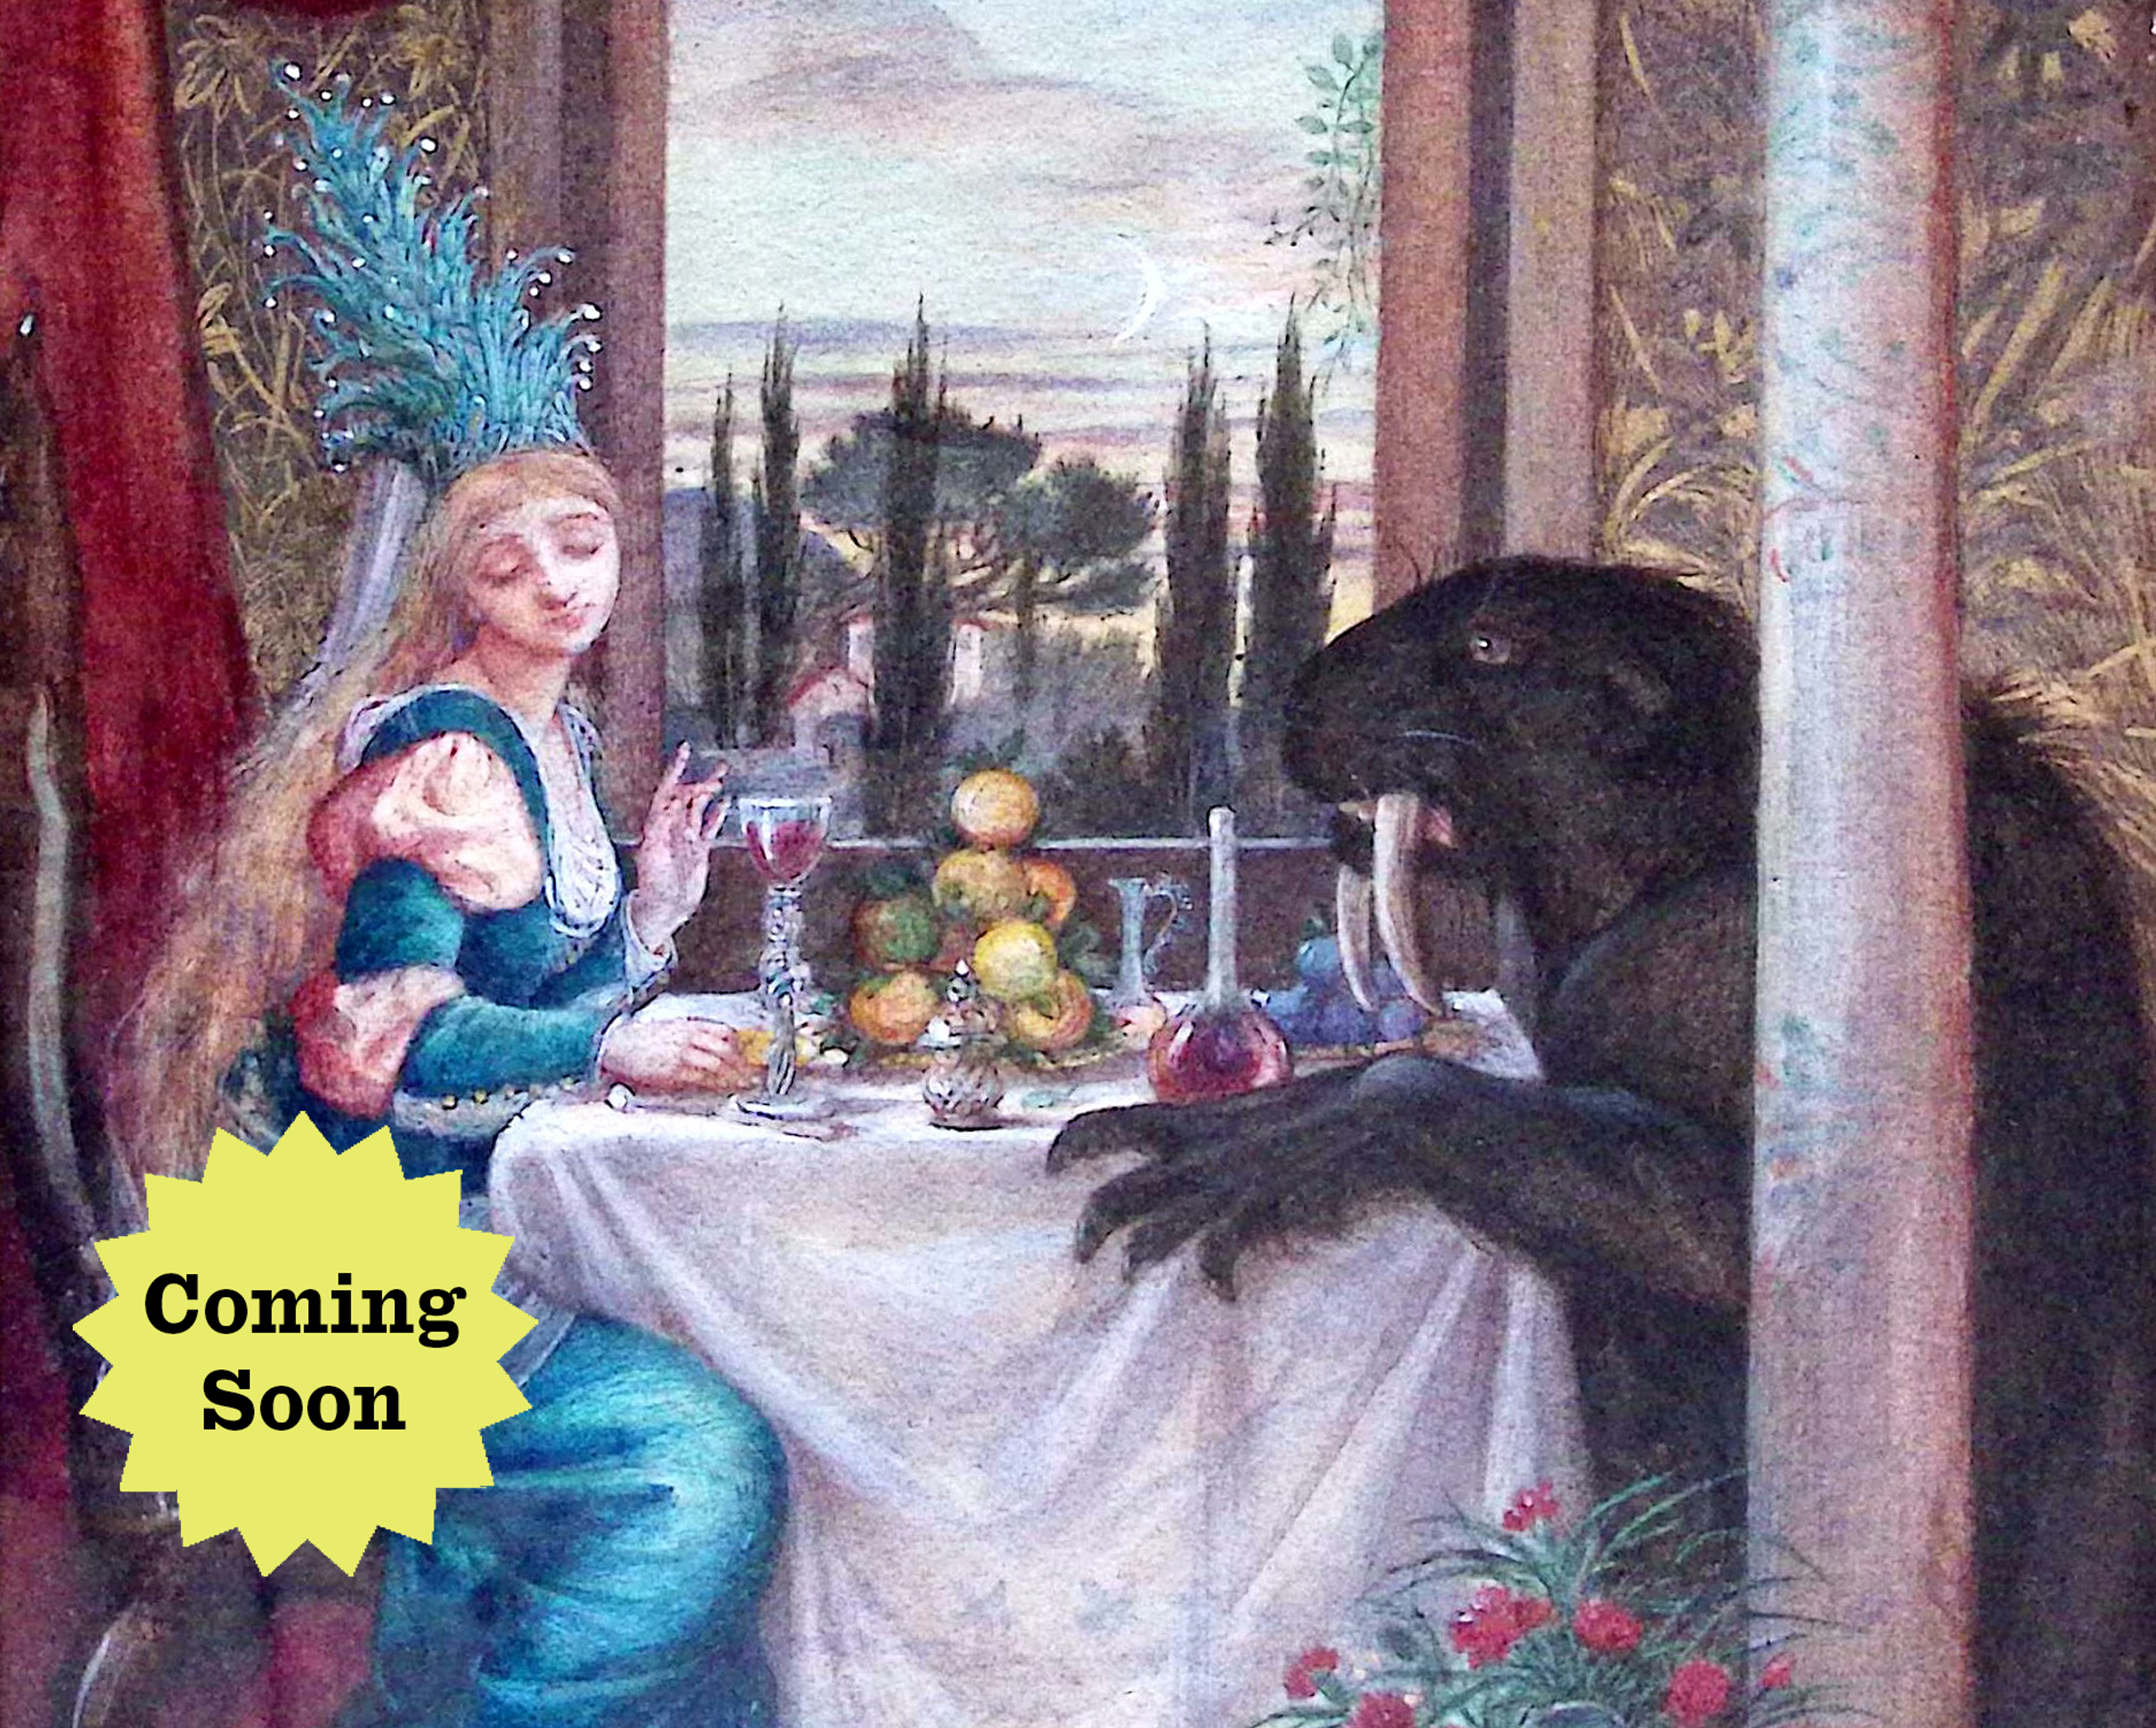 A pre-Raphaelite style woman in a turquoise dress and headdress sits at a table of food opposite a black furry creature with walrus tusks